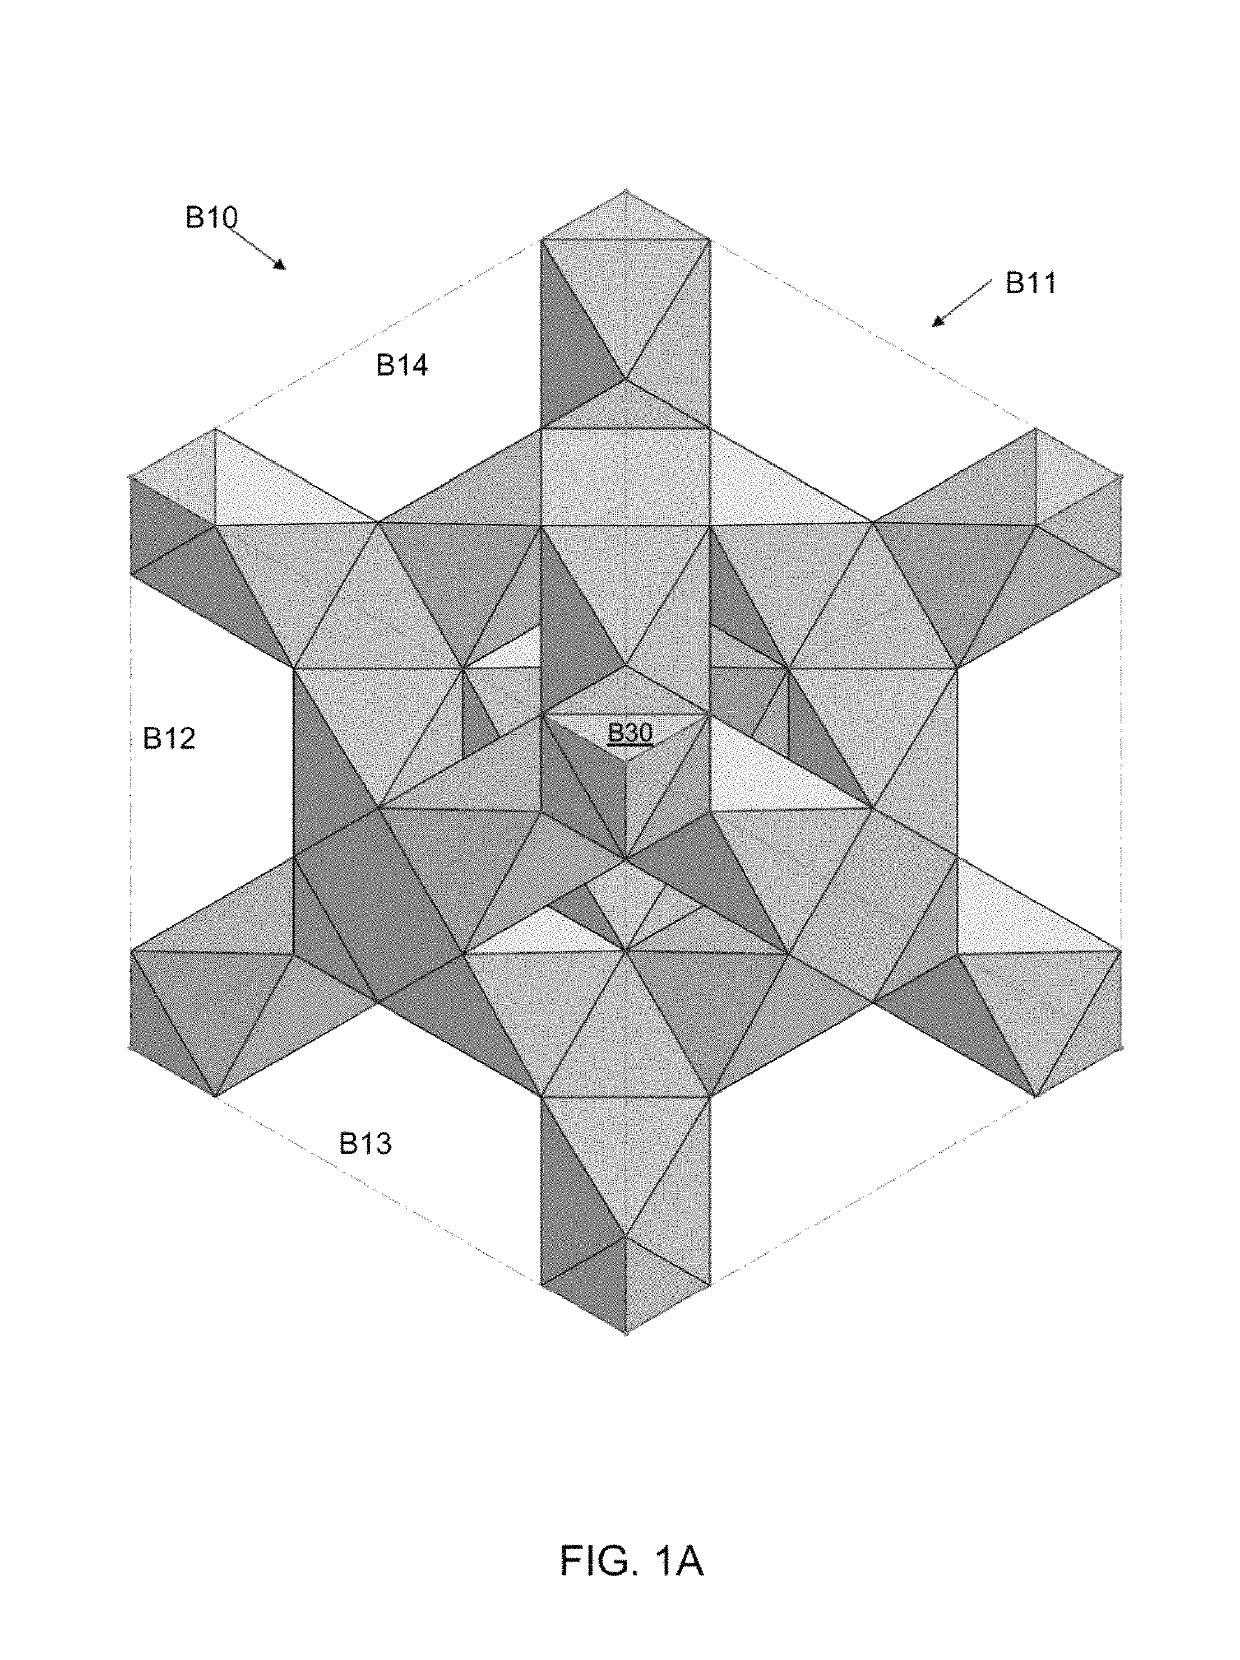 Three-dimensional lattice structures for implants